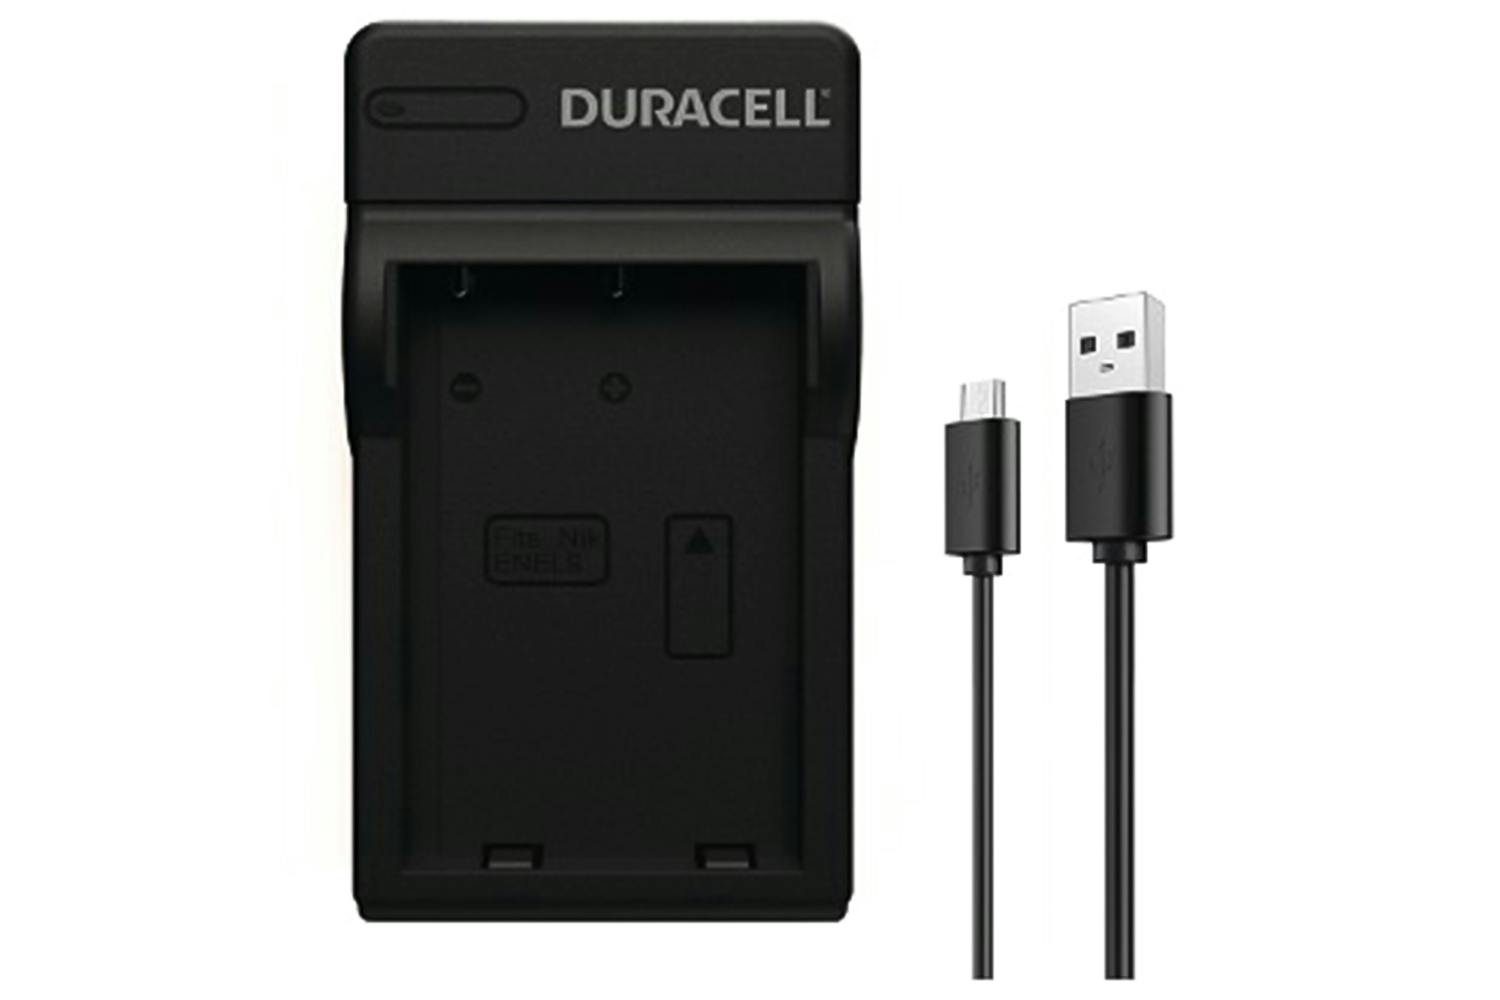 Duracell USB Charger Replacement for Fujifilm NP-W235